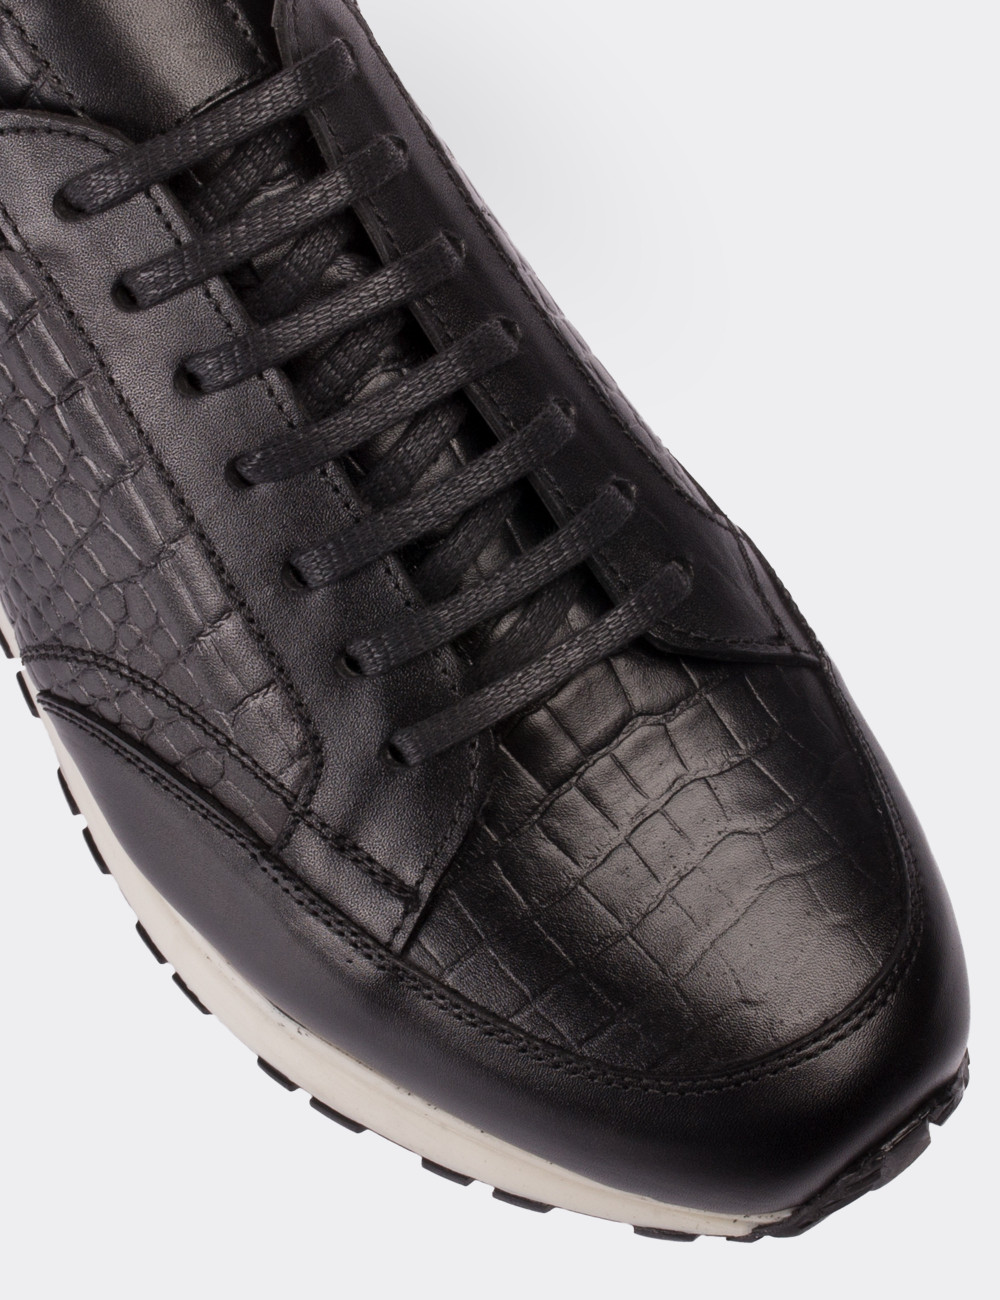 Black  Leather Lace-up Shoes - 01632MSYHT02